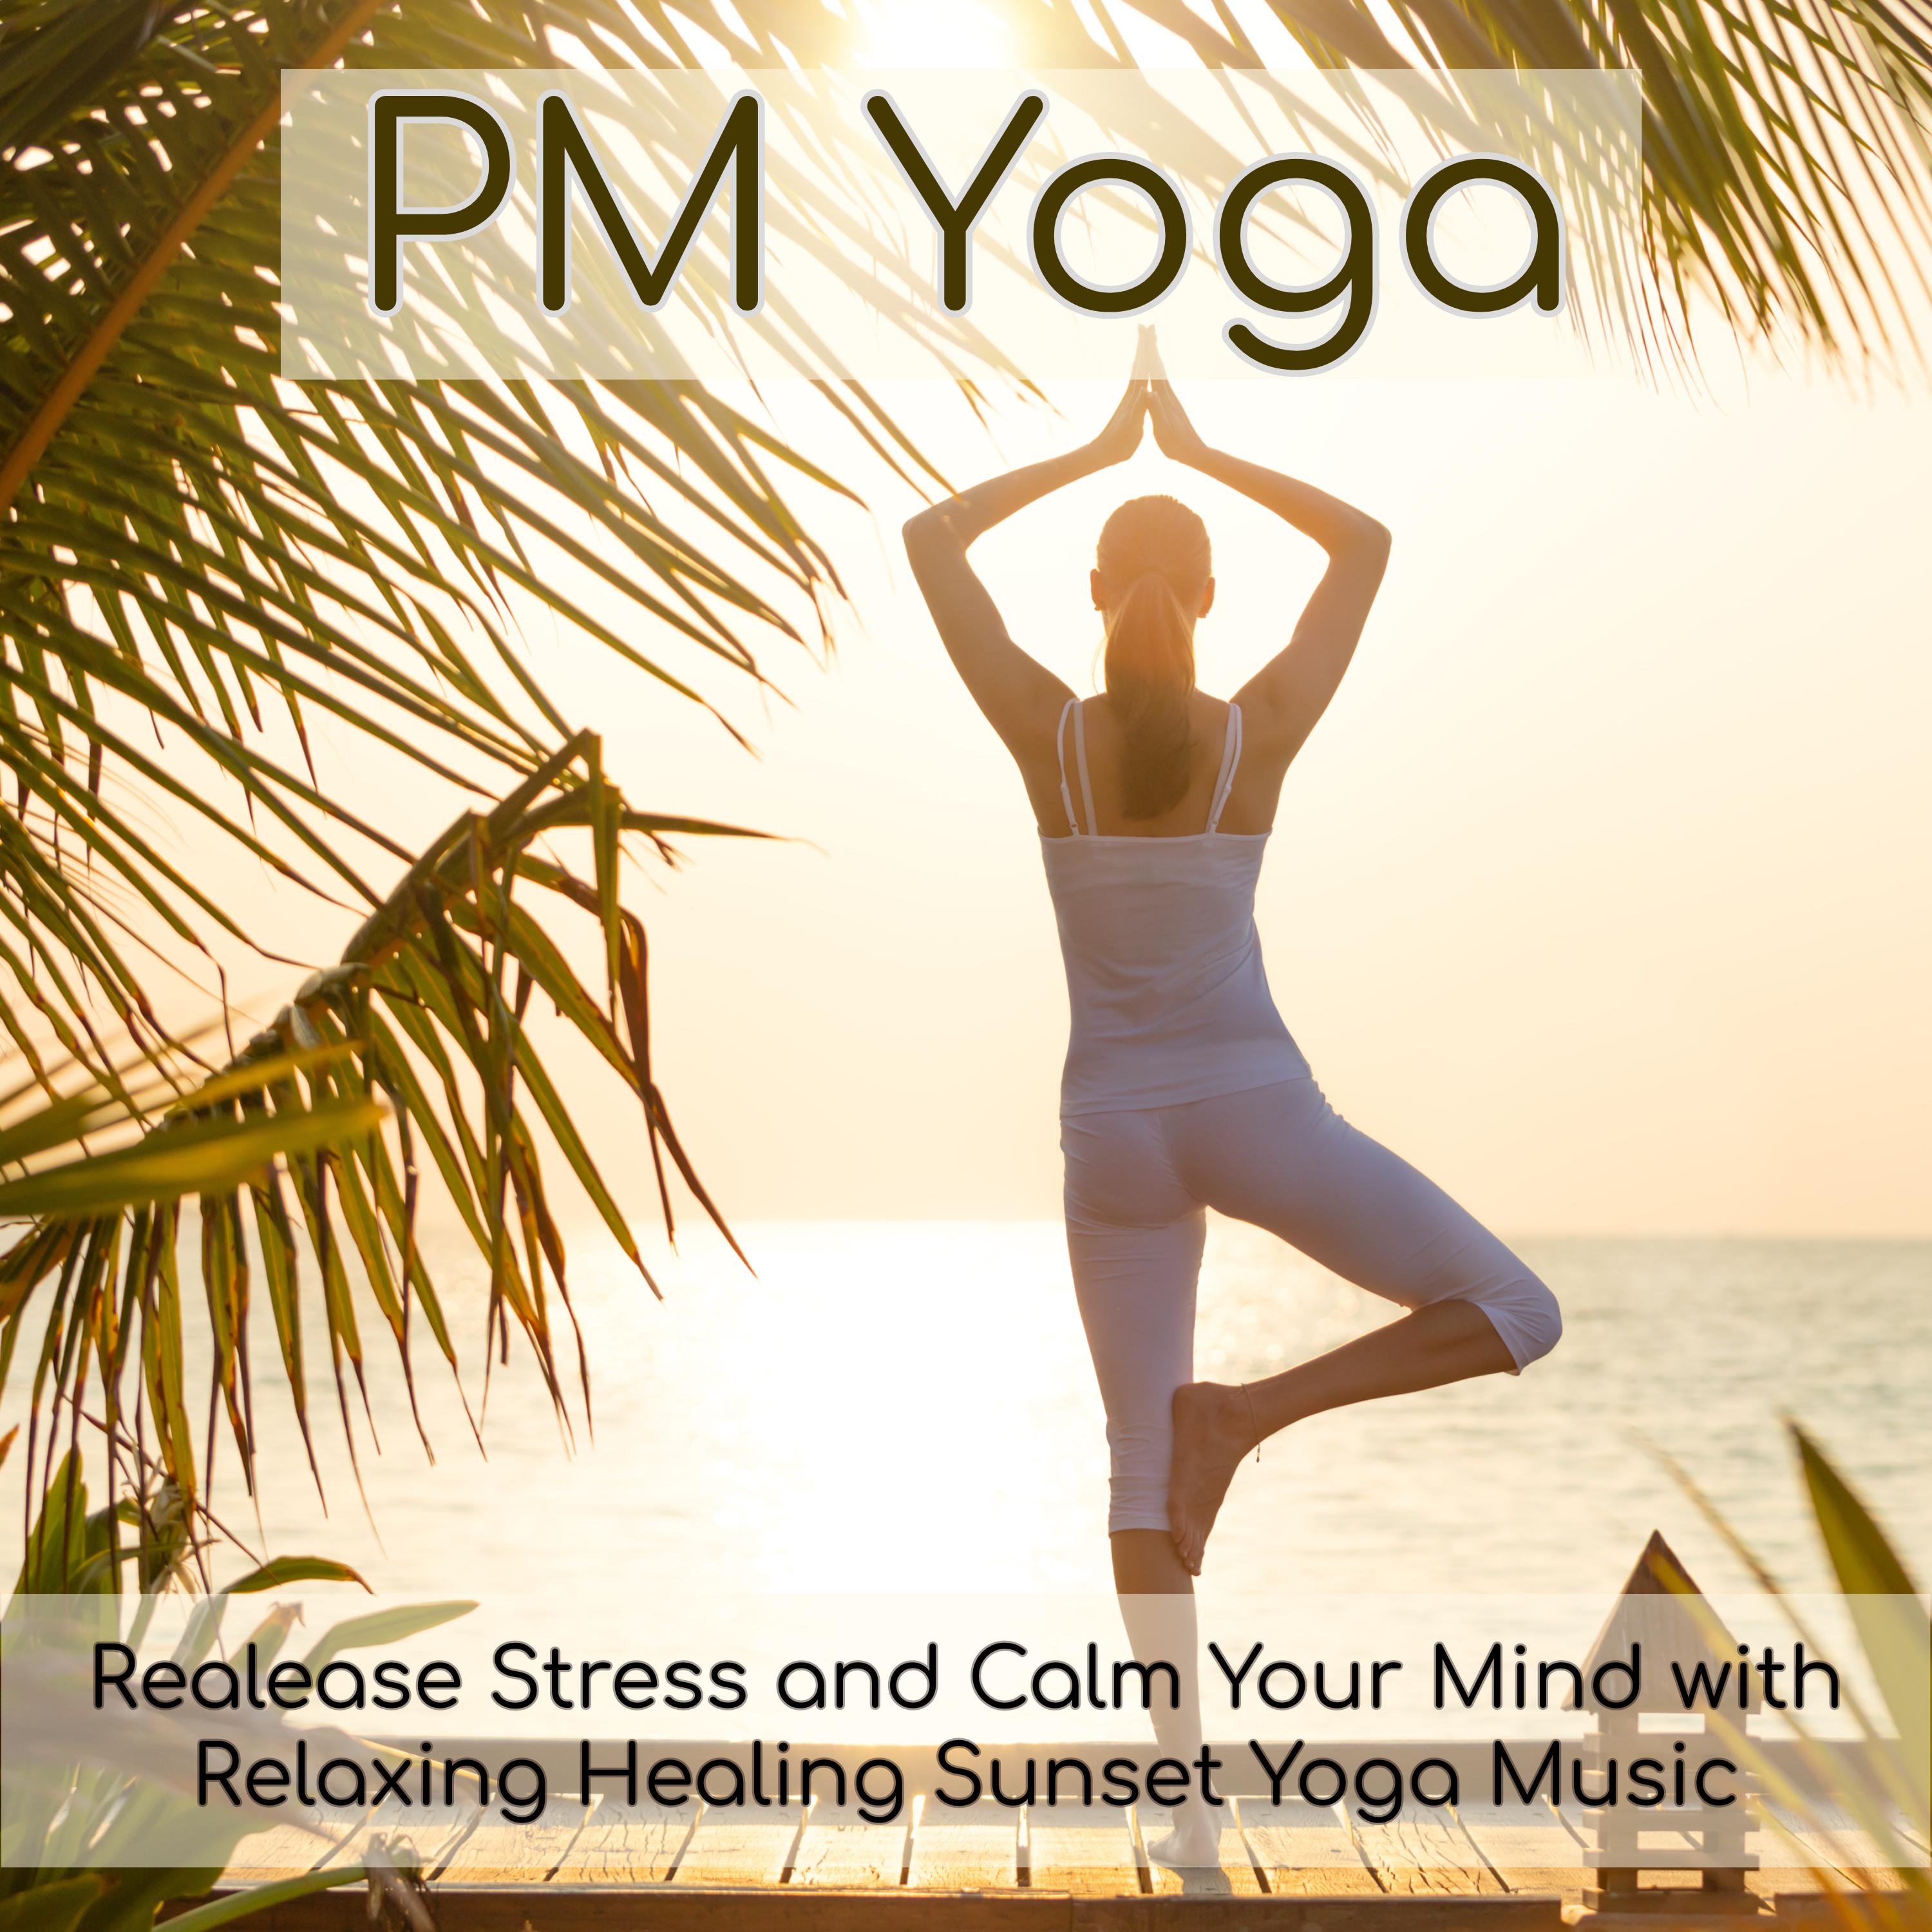 PM Yoga  Realease Stress and Calm Your Mind with Relaxing Healing Sunset Yoga Music